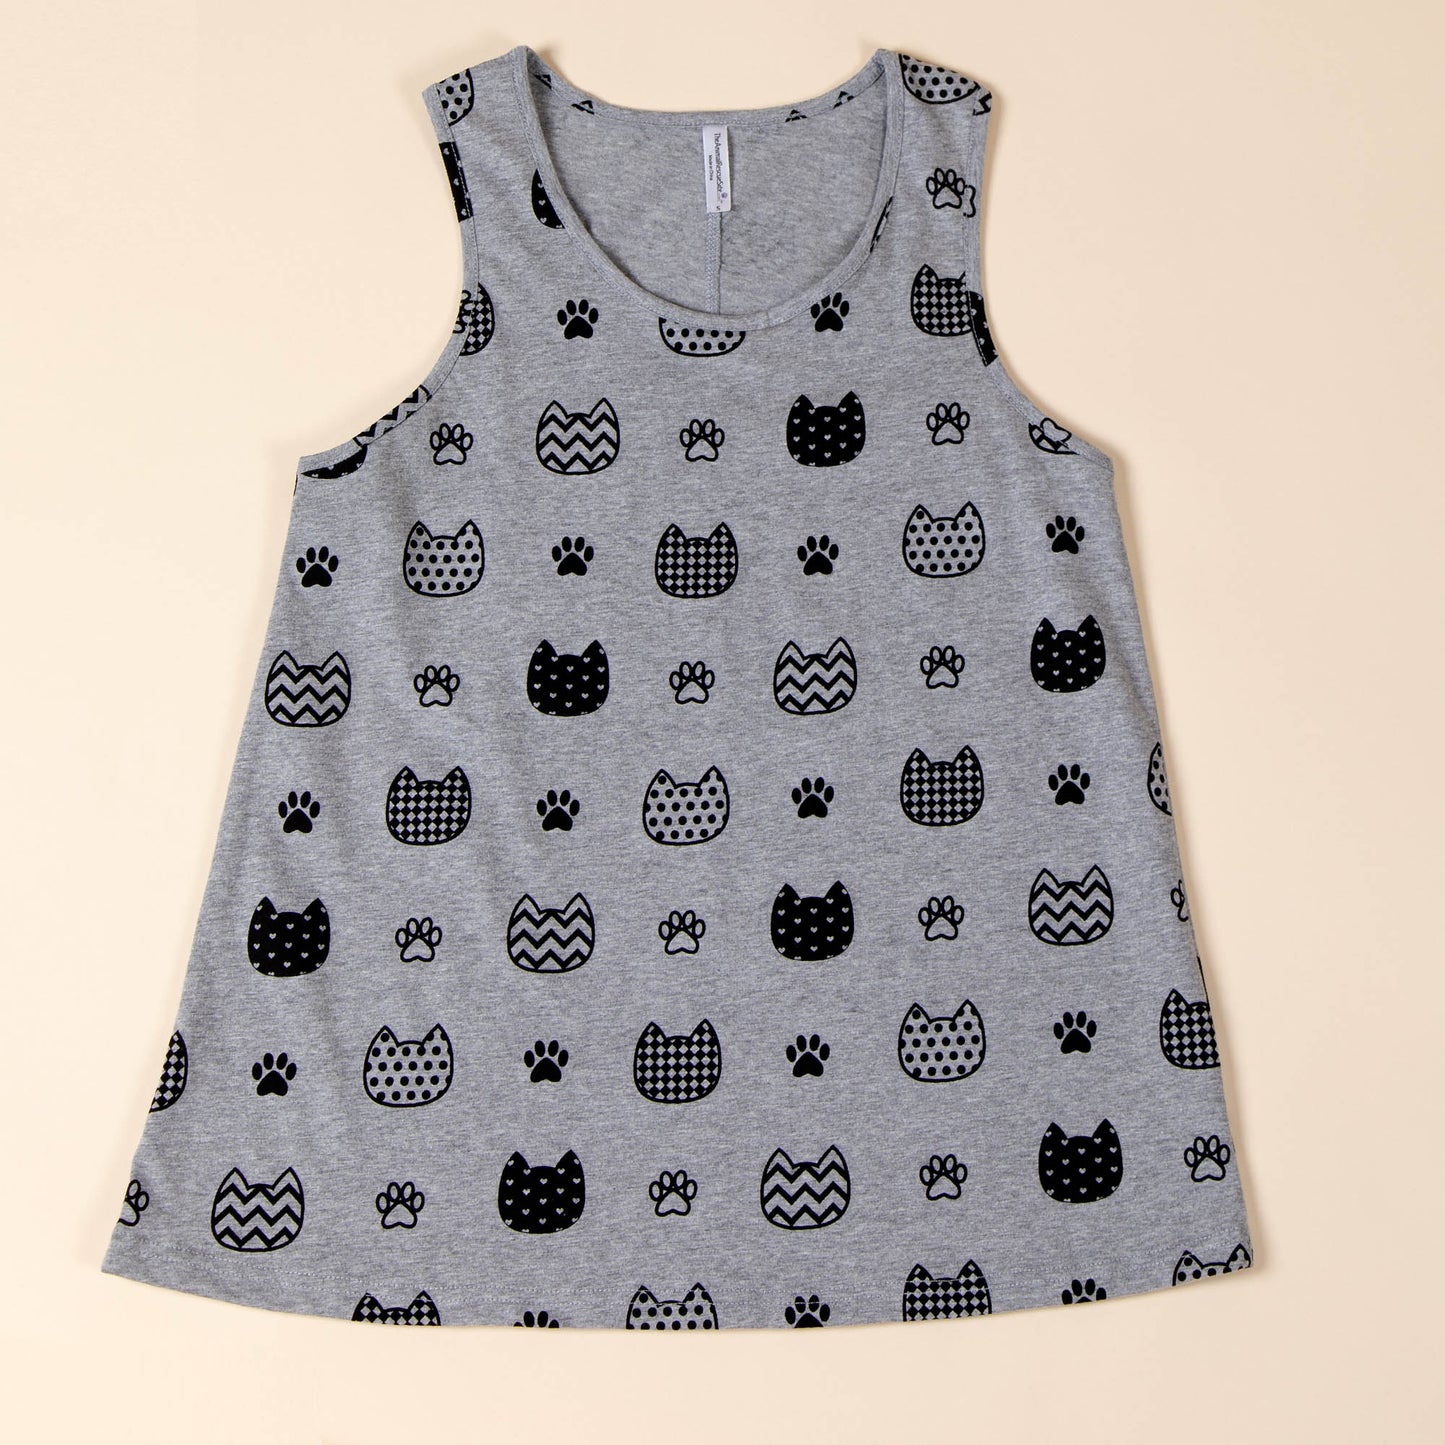 Pets with Prints Tank Top